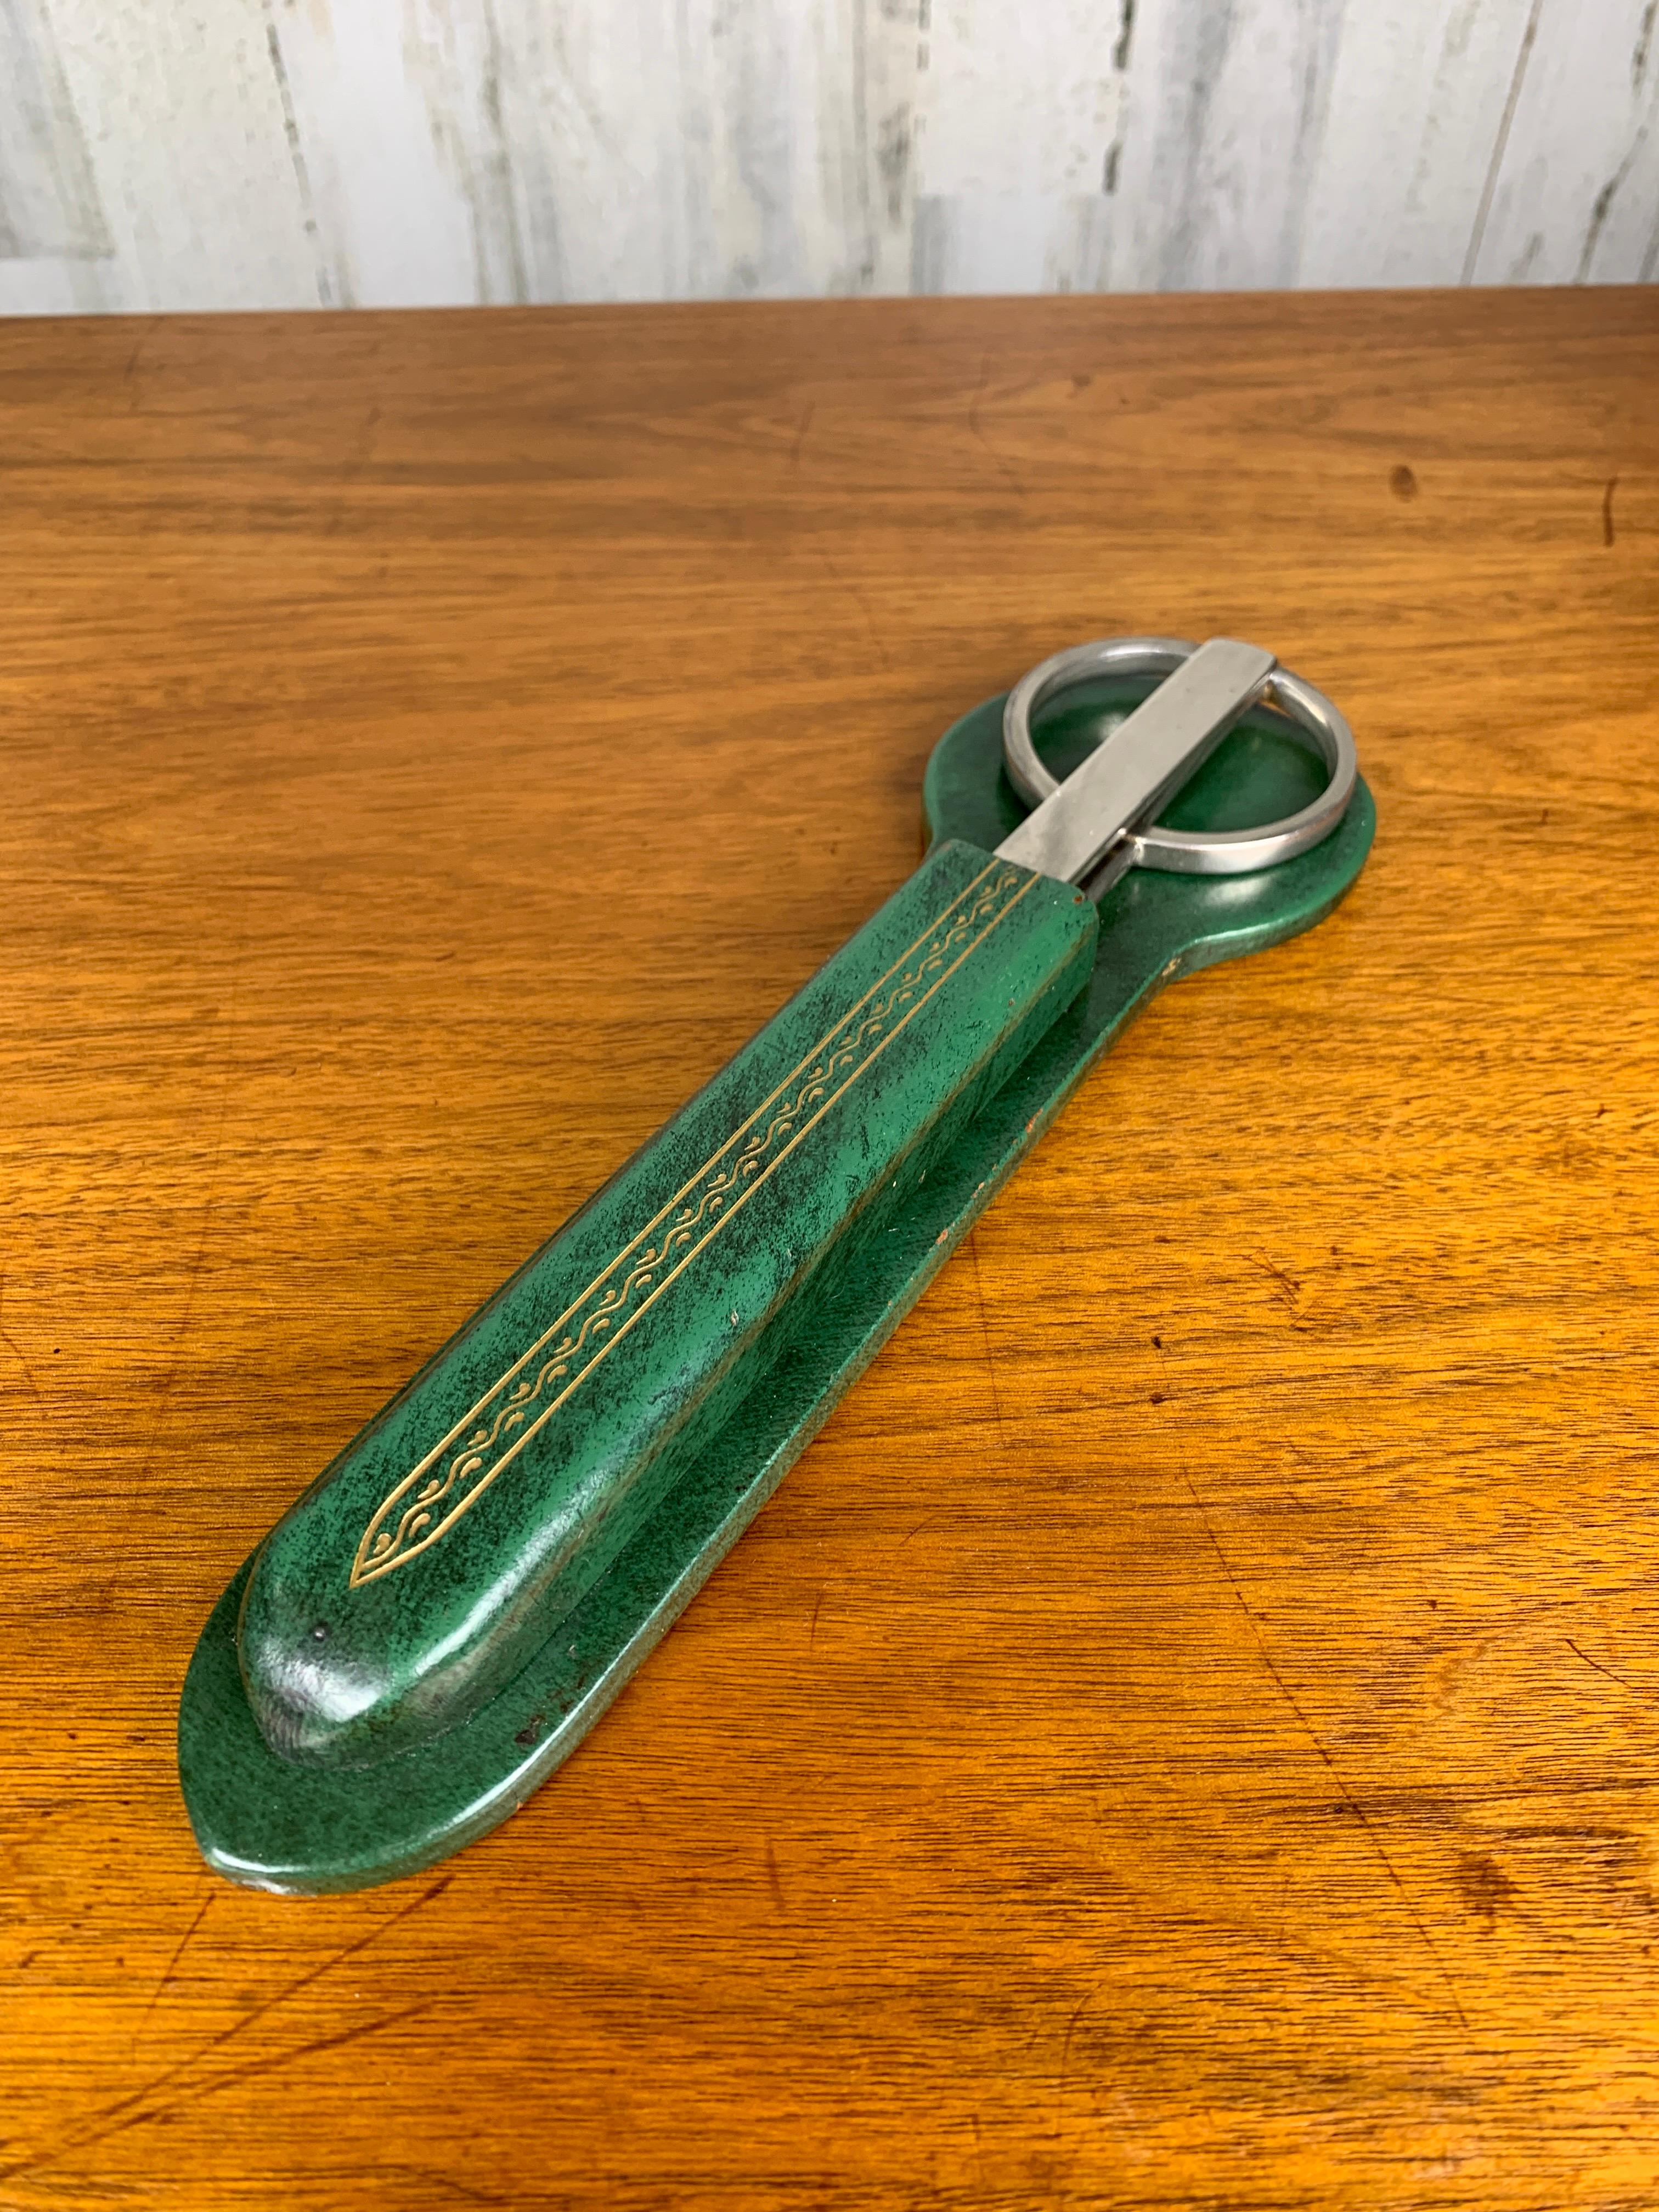 Gold leaf design on bankers green leather holder with nickel plated letter opener and D shaped handle forged scissors.